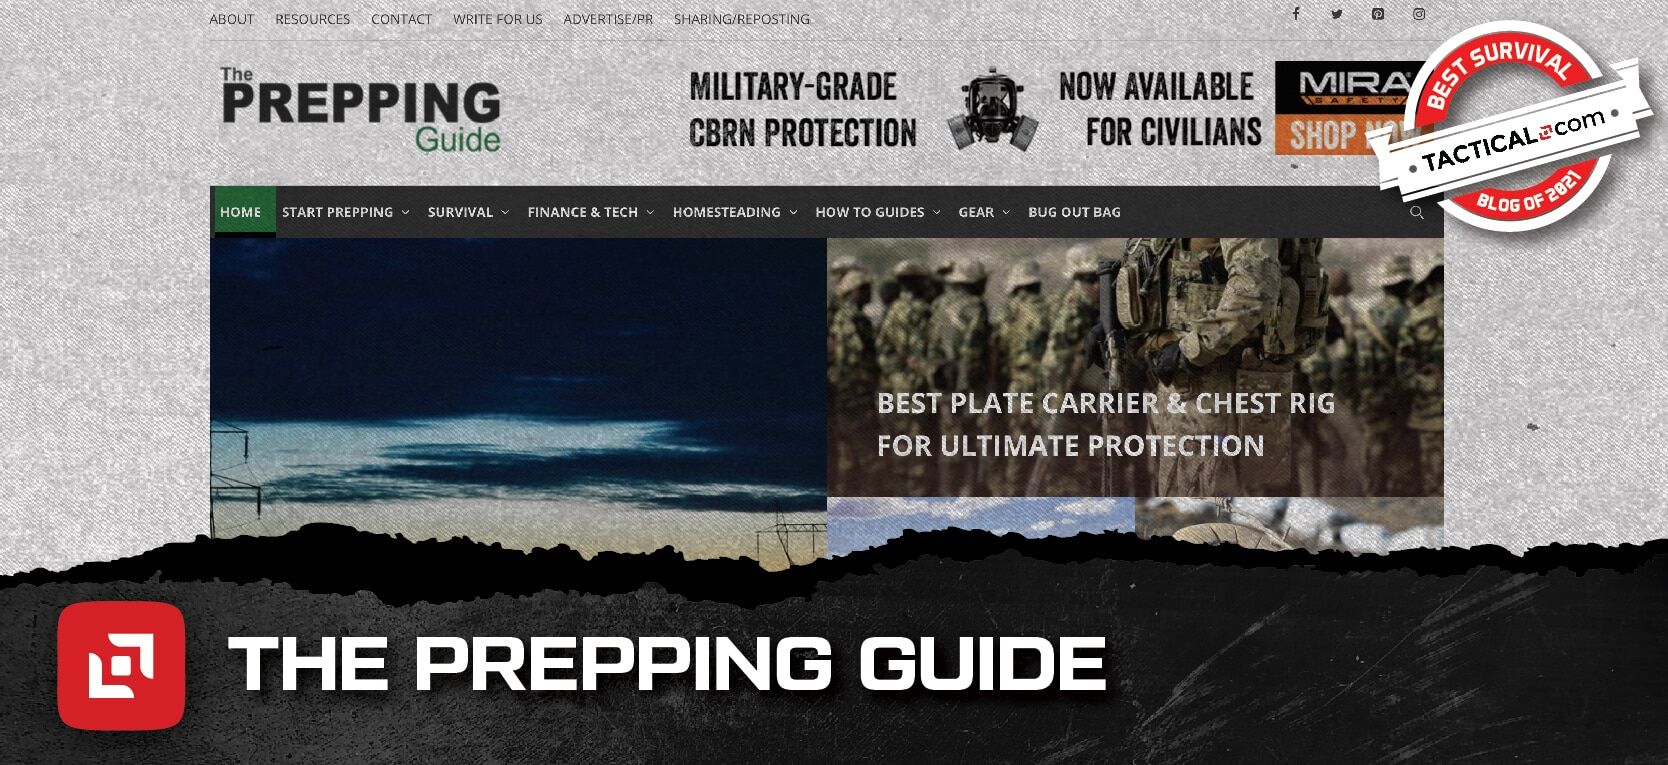 The Prepping Guide homepage